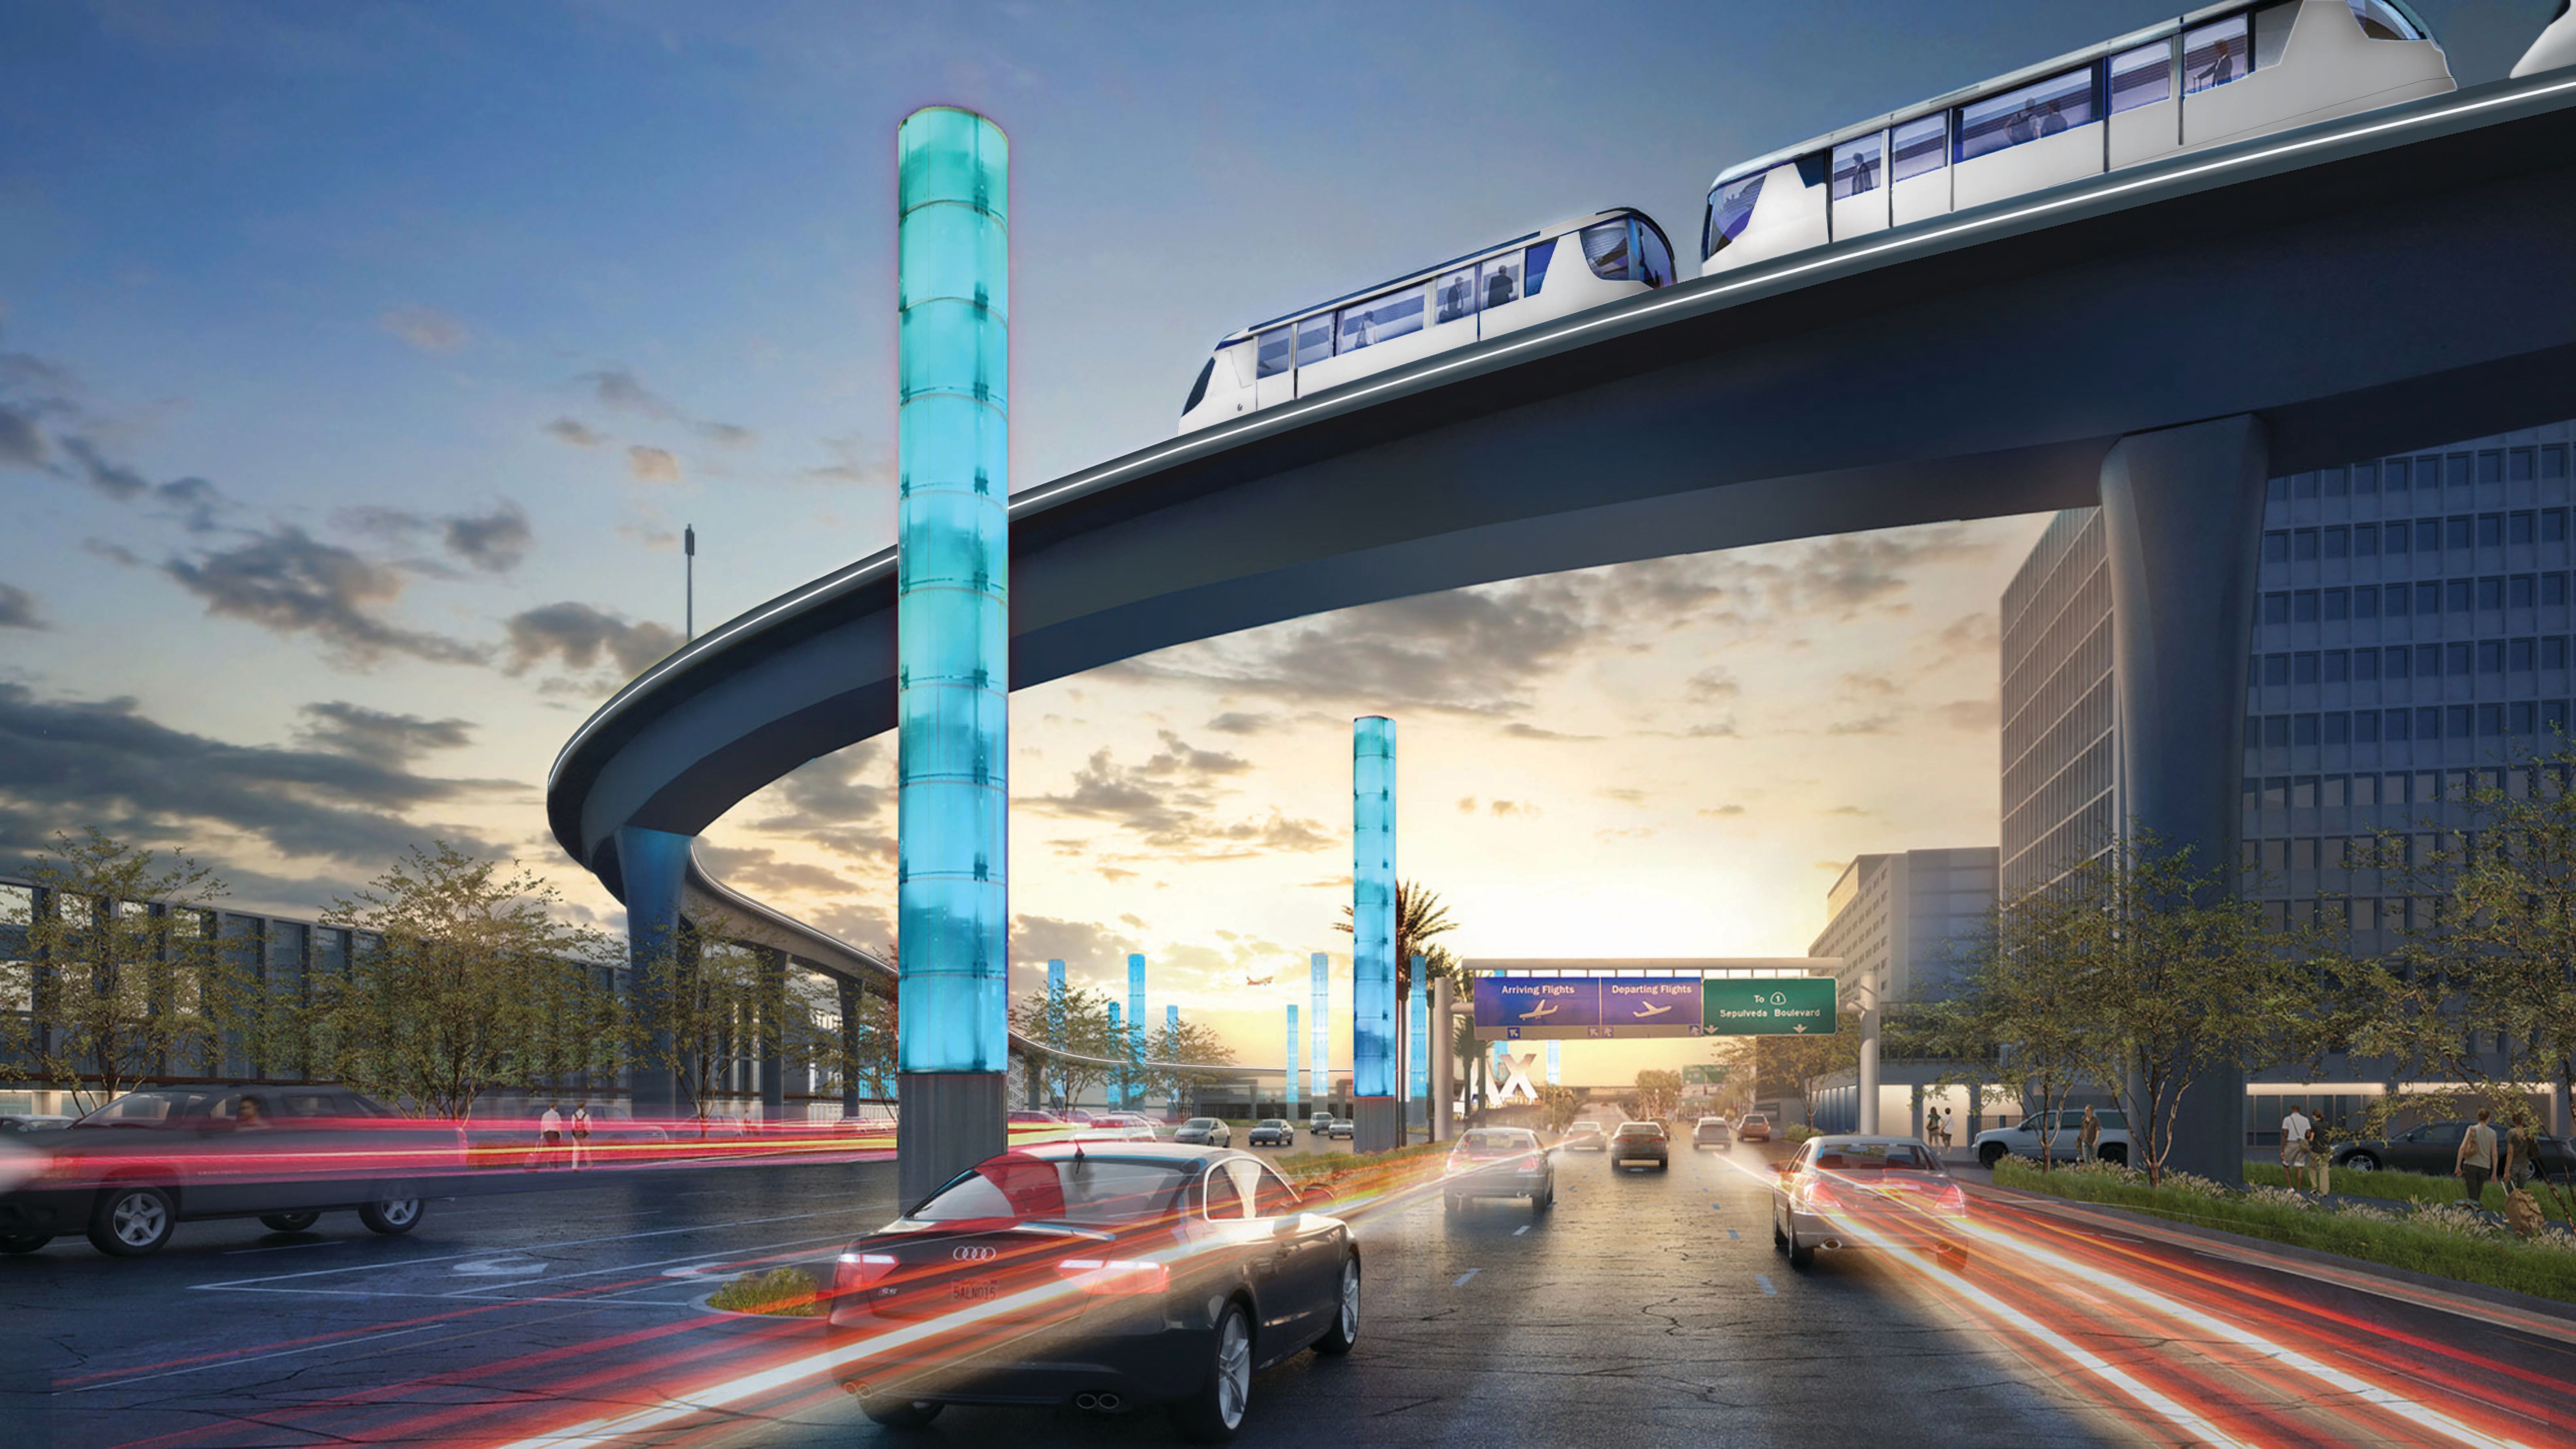 LAX People Mover on track for completion after board approves extra $400 million